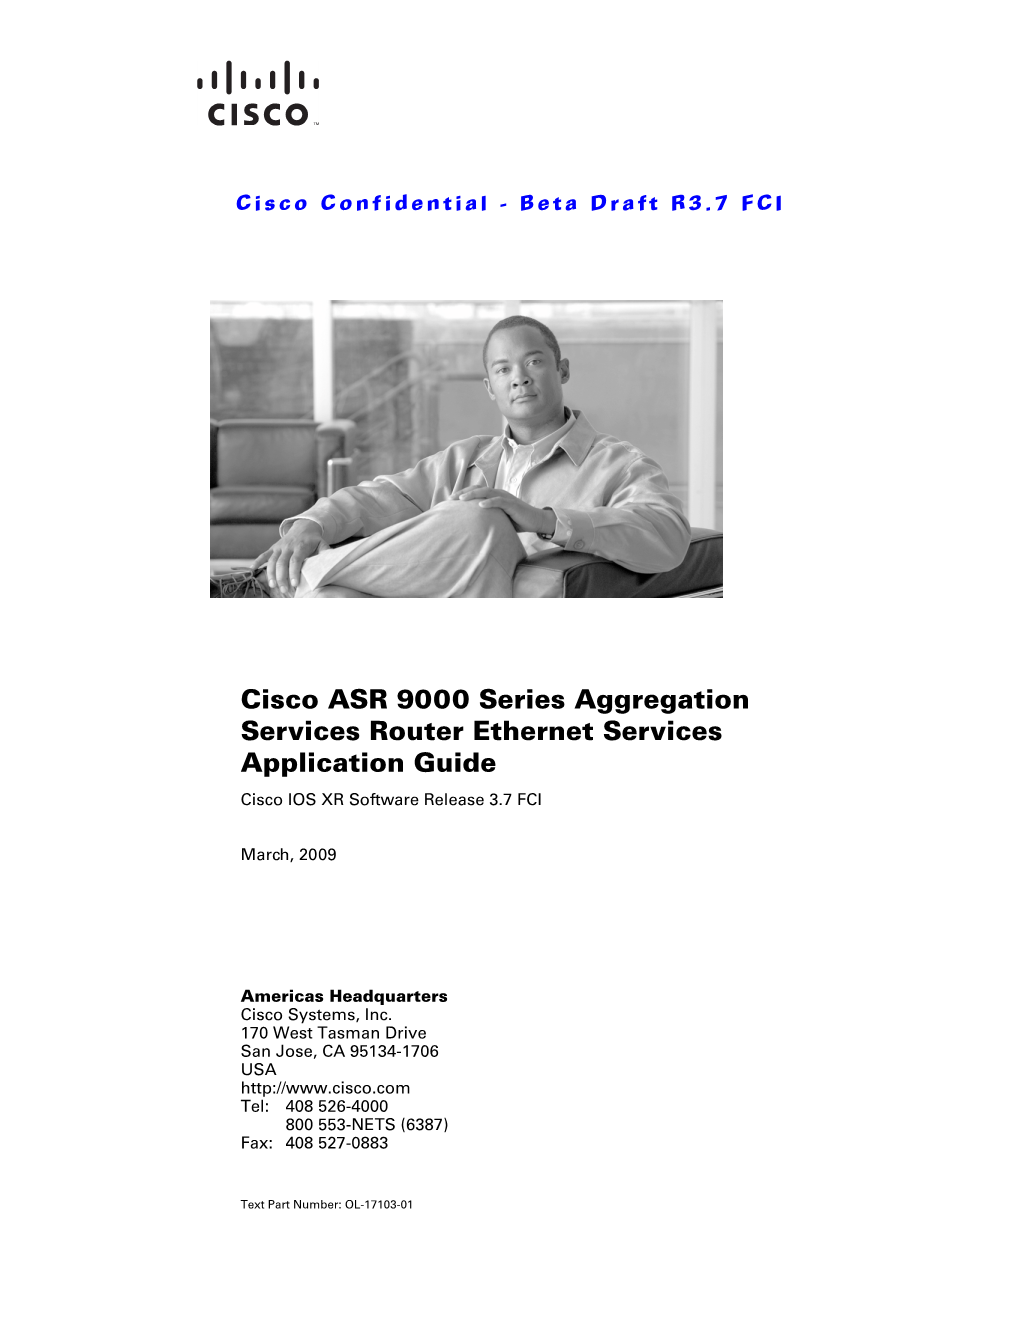 PDF Copy of the Cisco ASR 9000 Series Aggregation Services Router